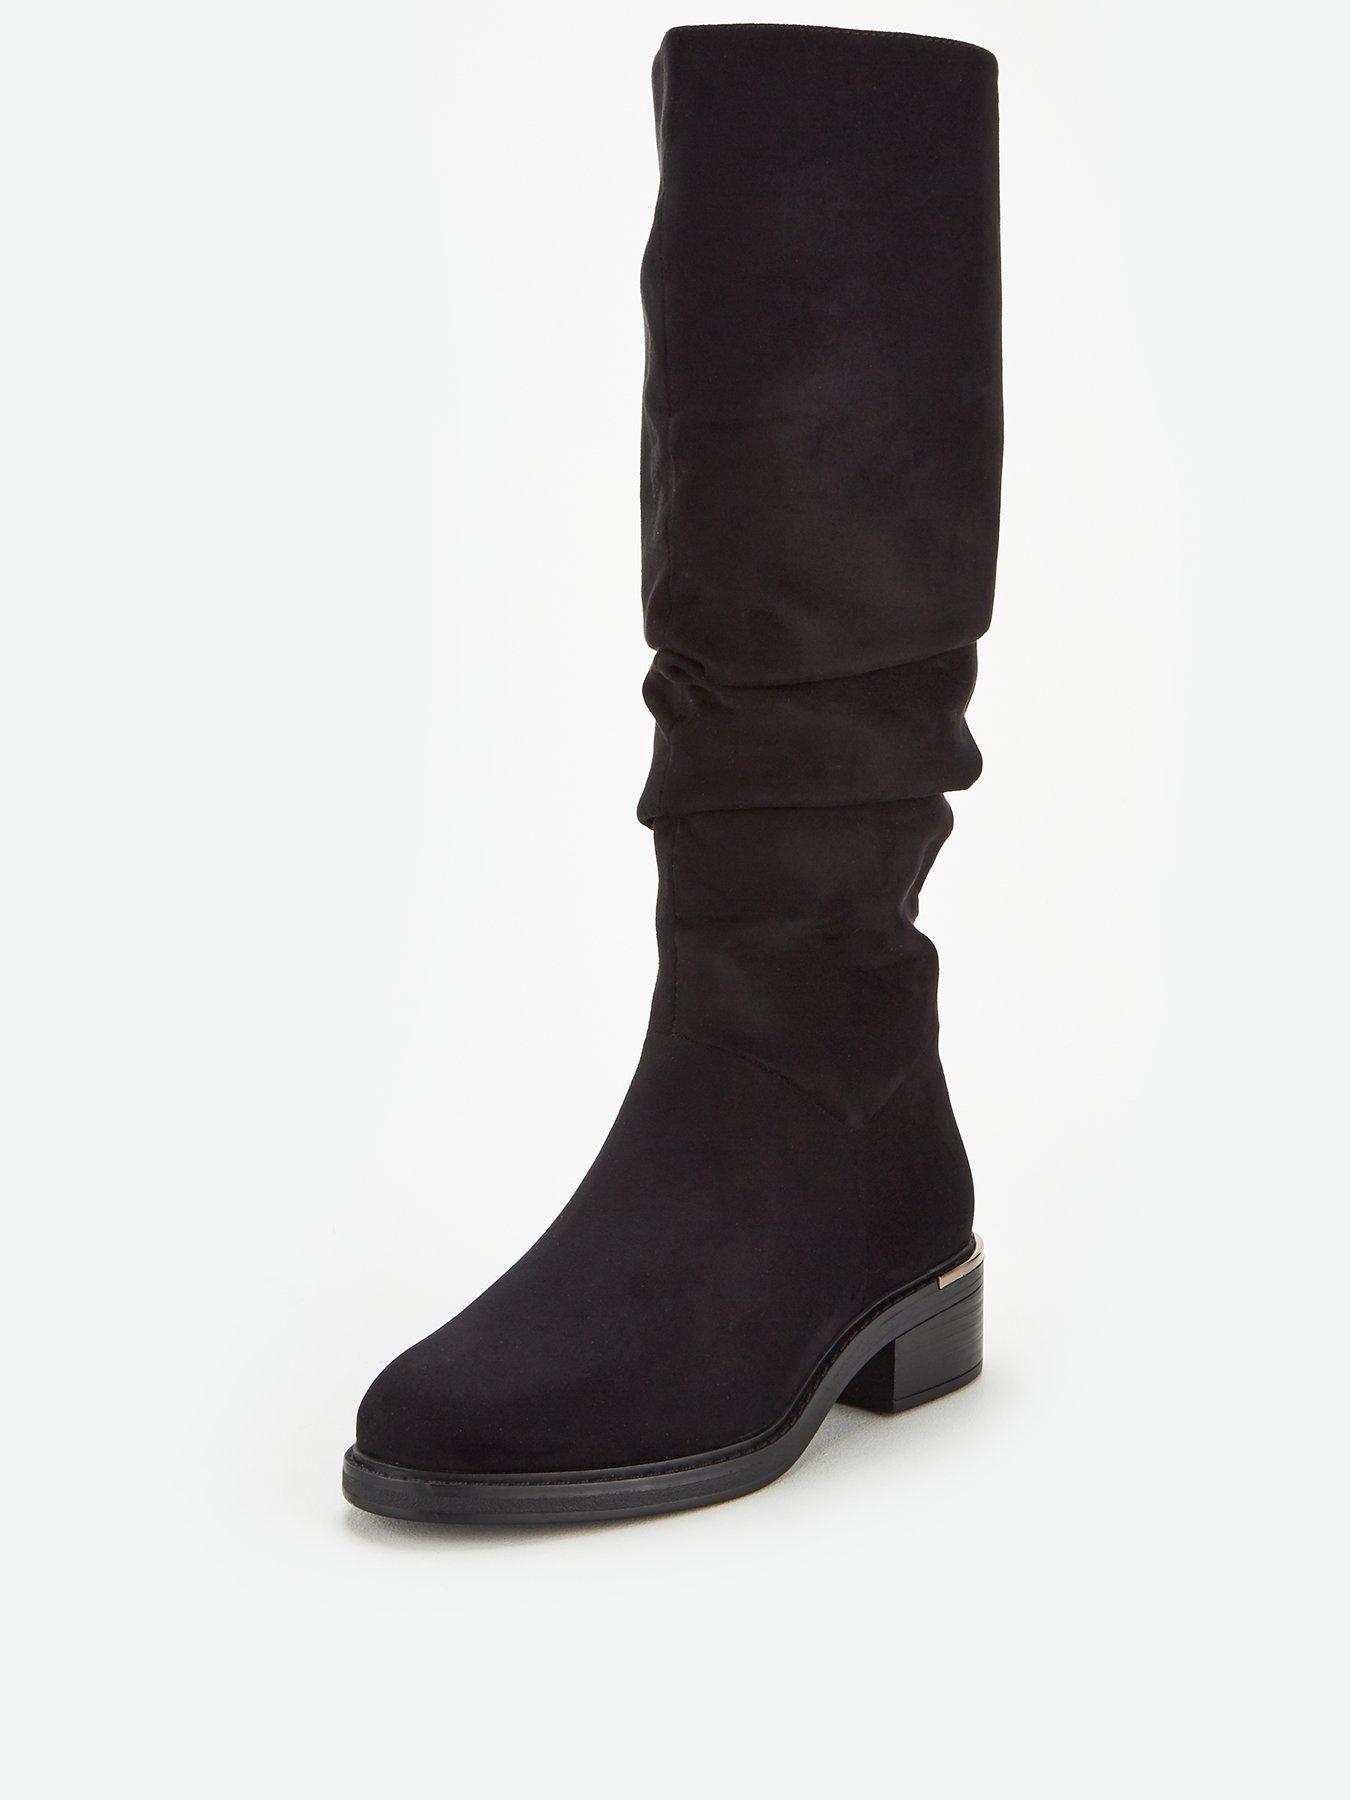 slouch boots ireland